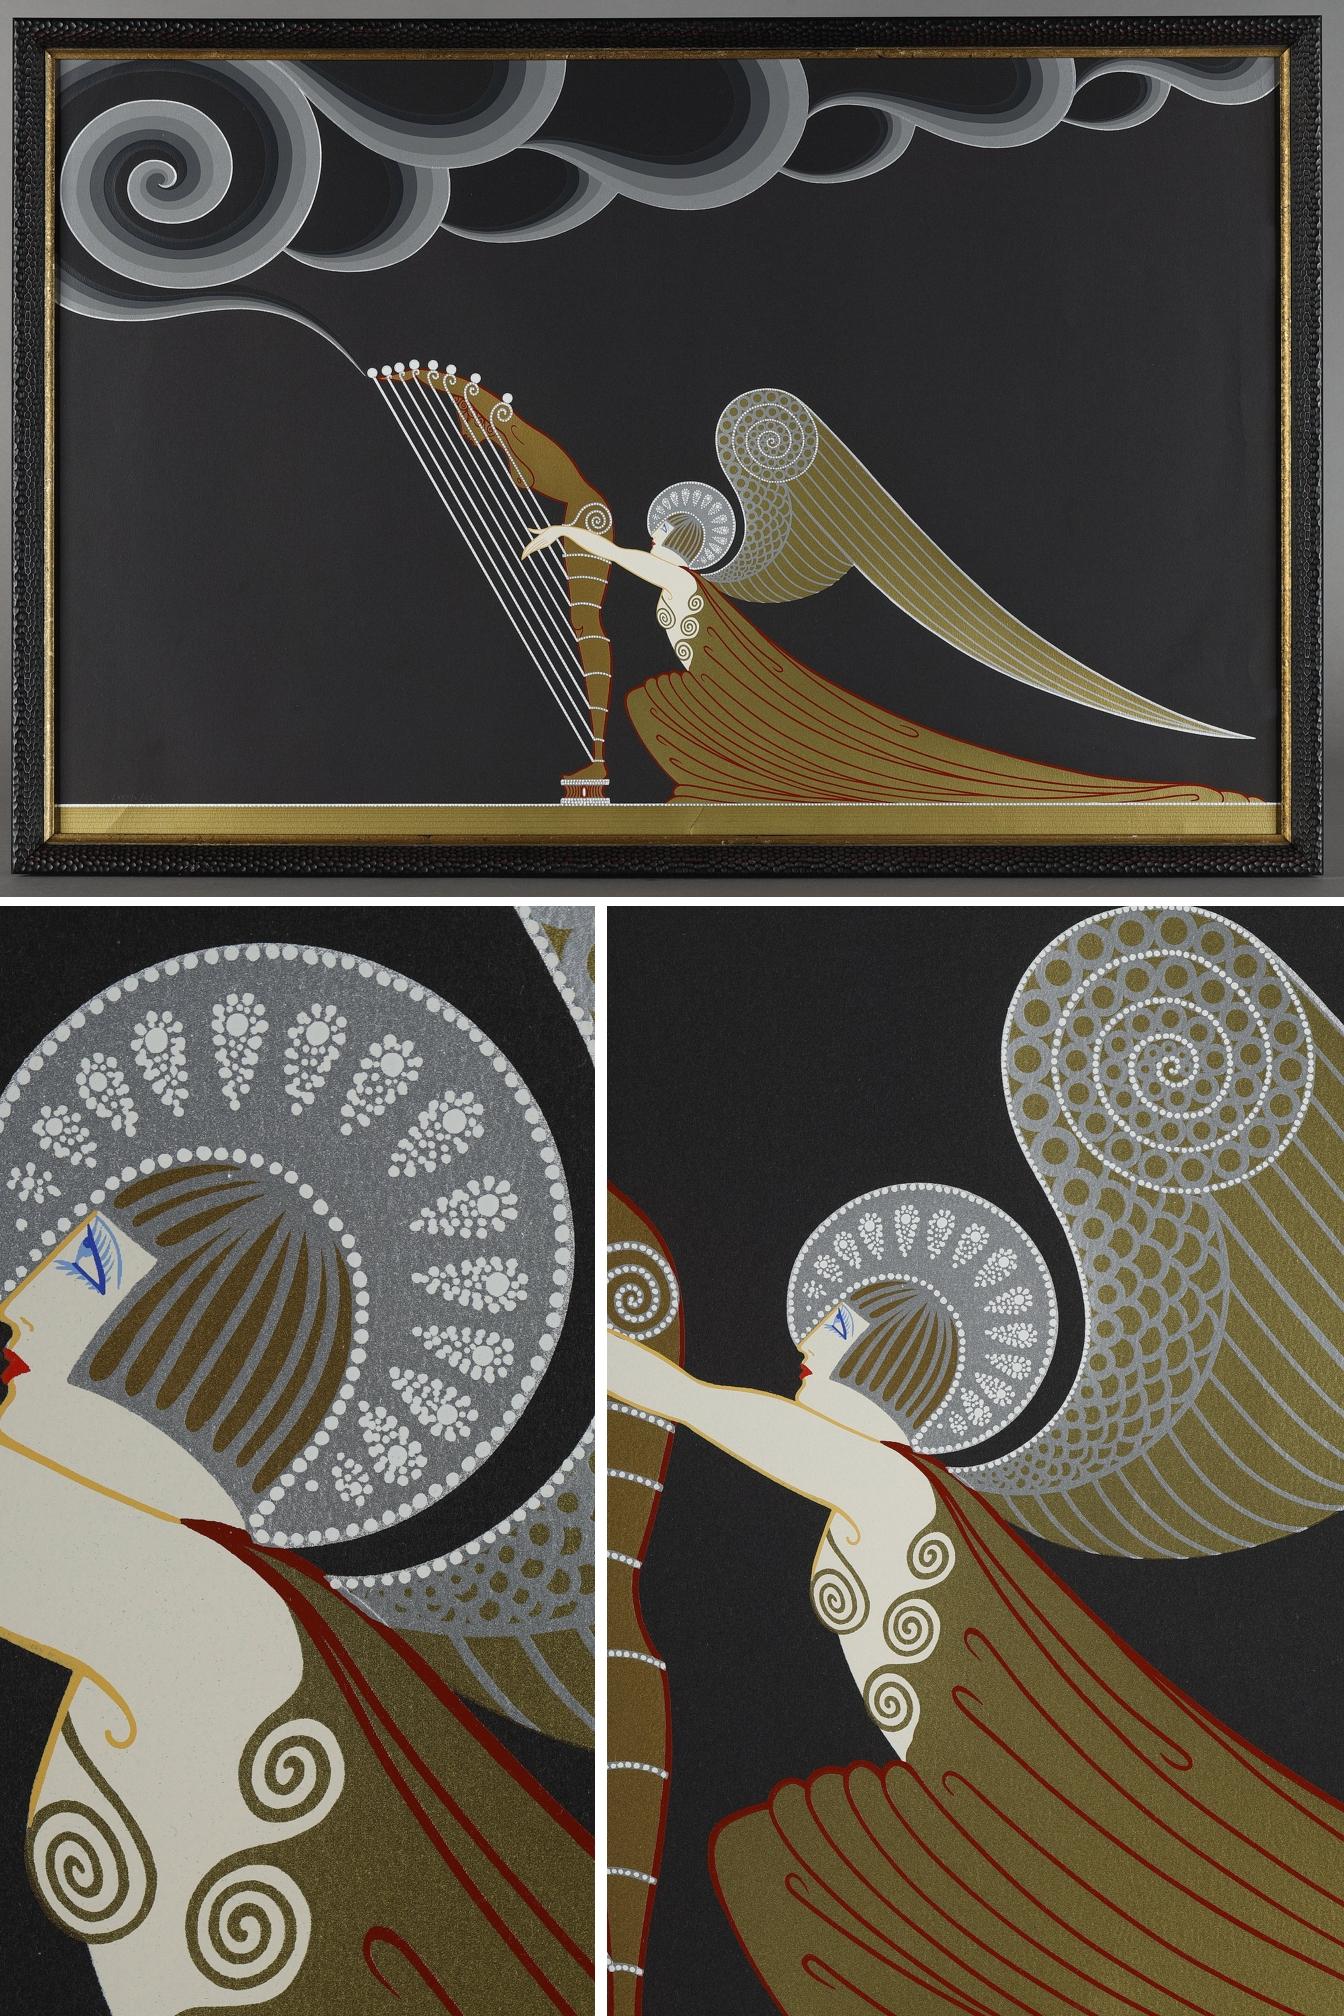 L'ange à la harpe, color lithograph numbered LXXXIV/CL by Romain de Tirtoff dit Erté (1892-1990).

He was born in Saint Petersburg to a famous Russian family whose father was an admiral in the imperial fleet. He moved to Paris in 1912 and took Erté